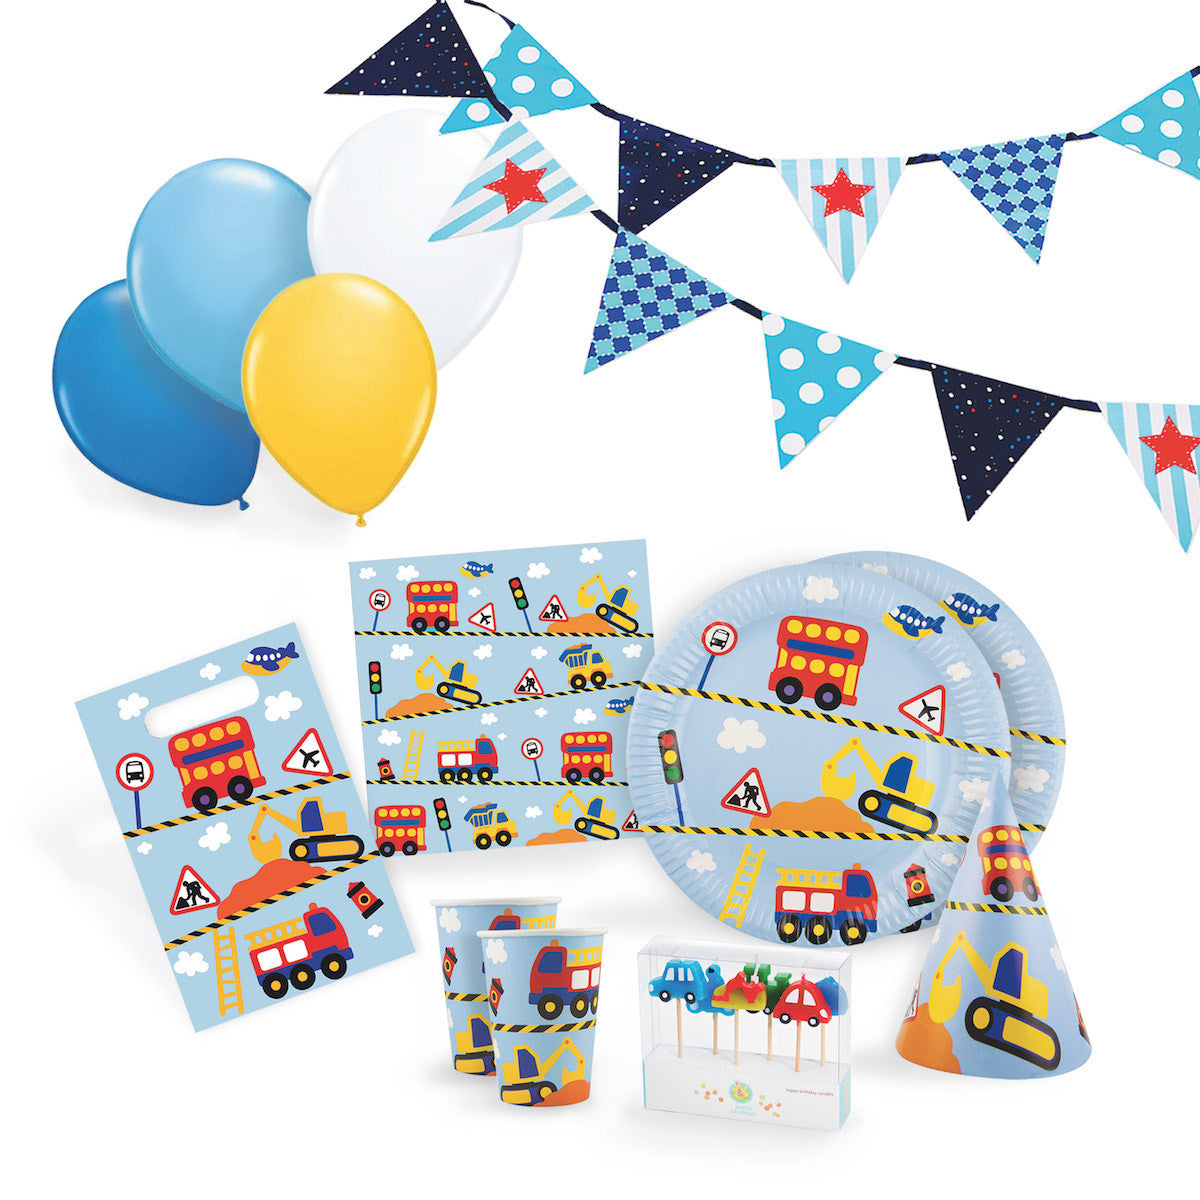 VCOSTORE 64 Pcs Construction Themed Party Decorations Birthday Party Supplies Kit 